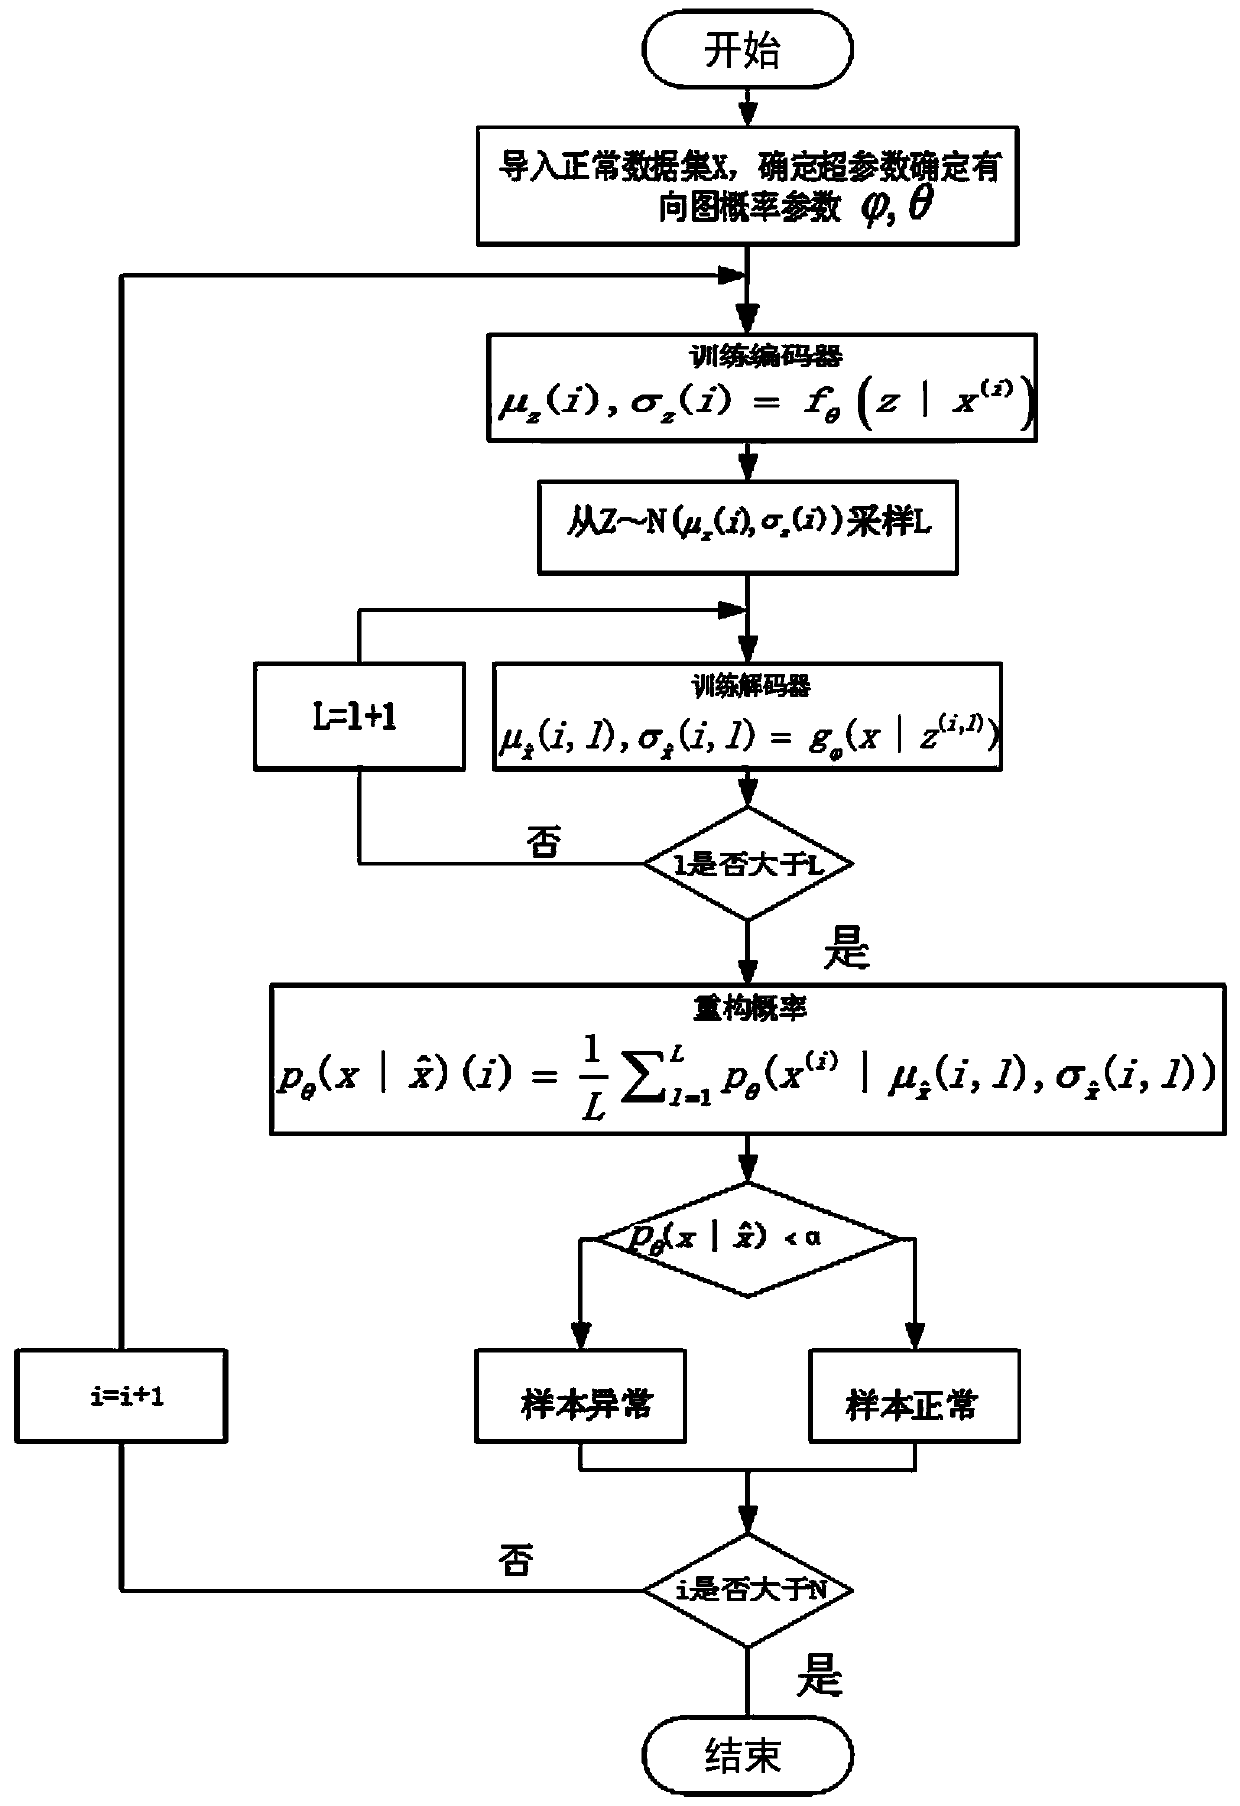 An electric price inspection execution method based on deep learning of big data